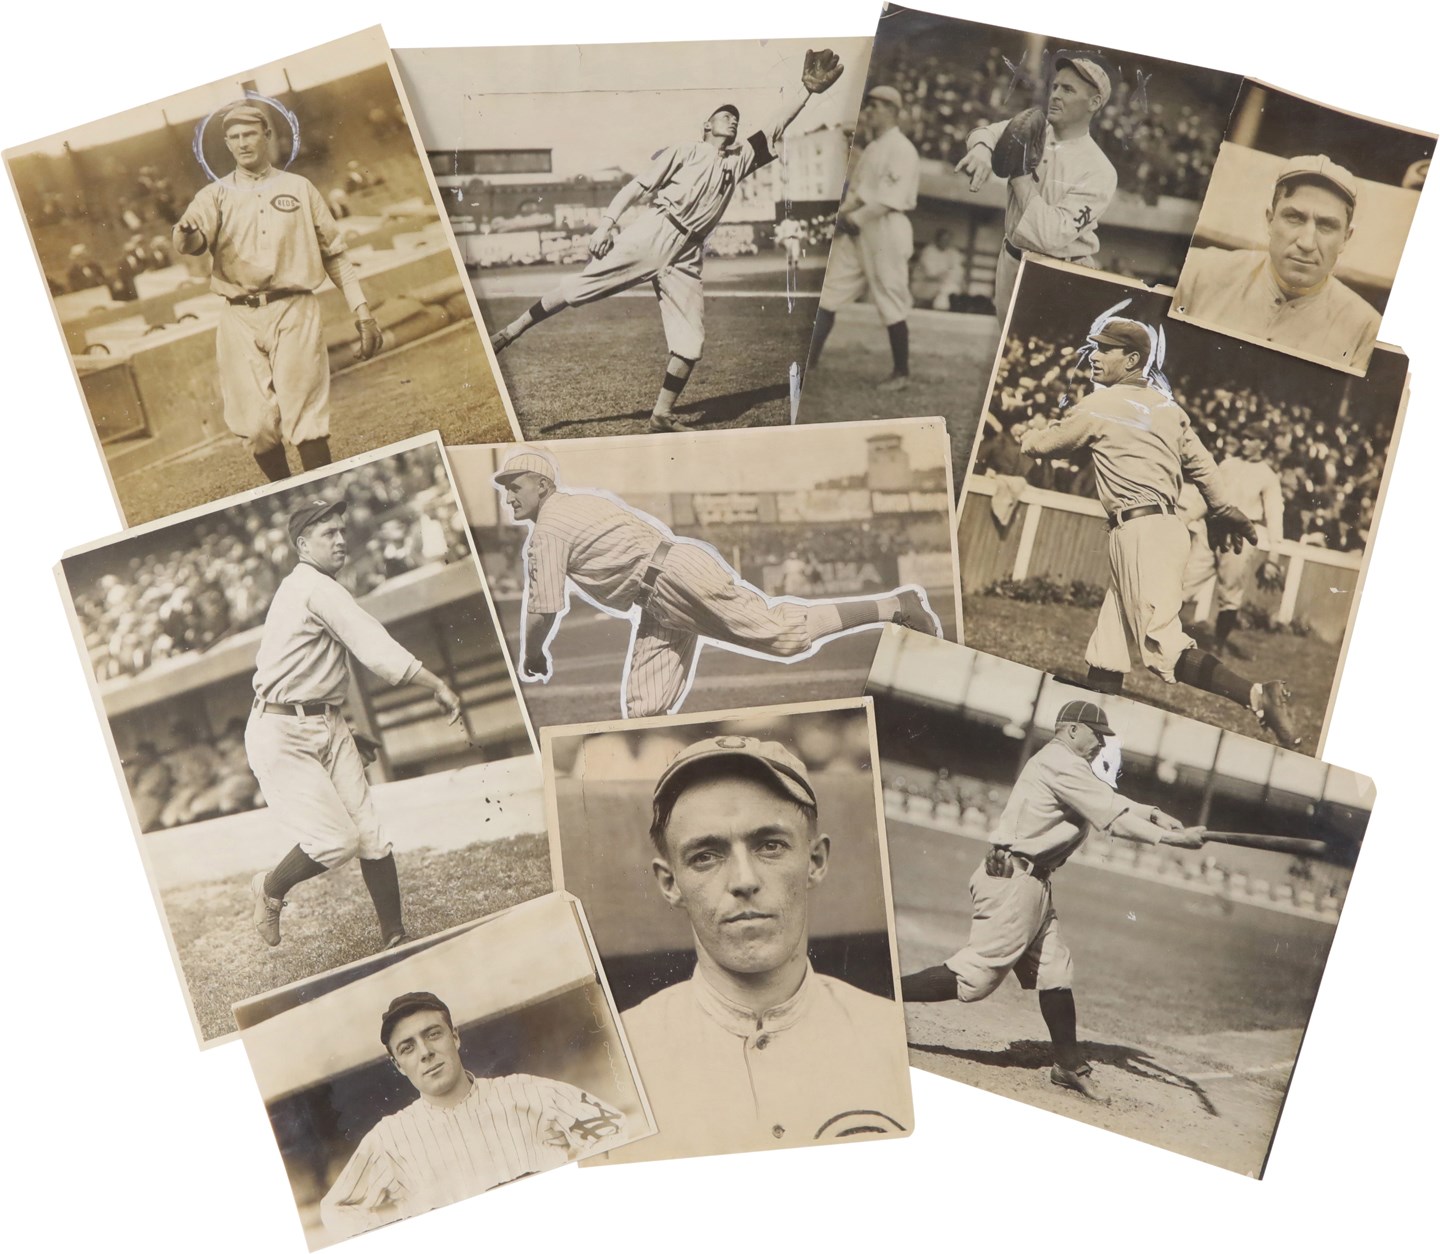 Vintage Sports Photographs - 1910s Baseball Photographs by Charles Conlon (28 Different)